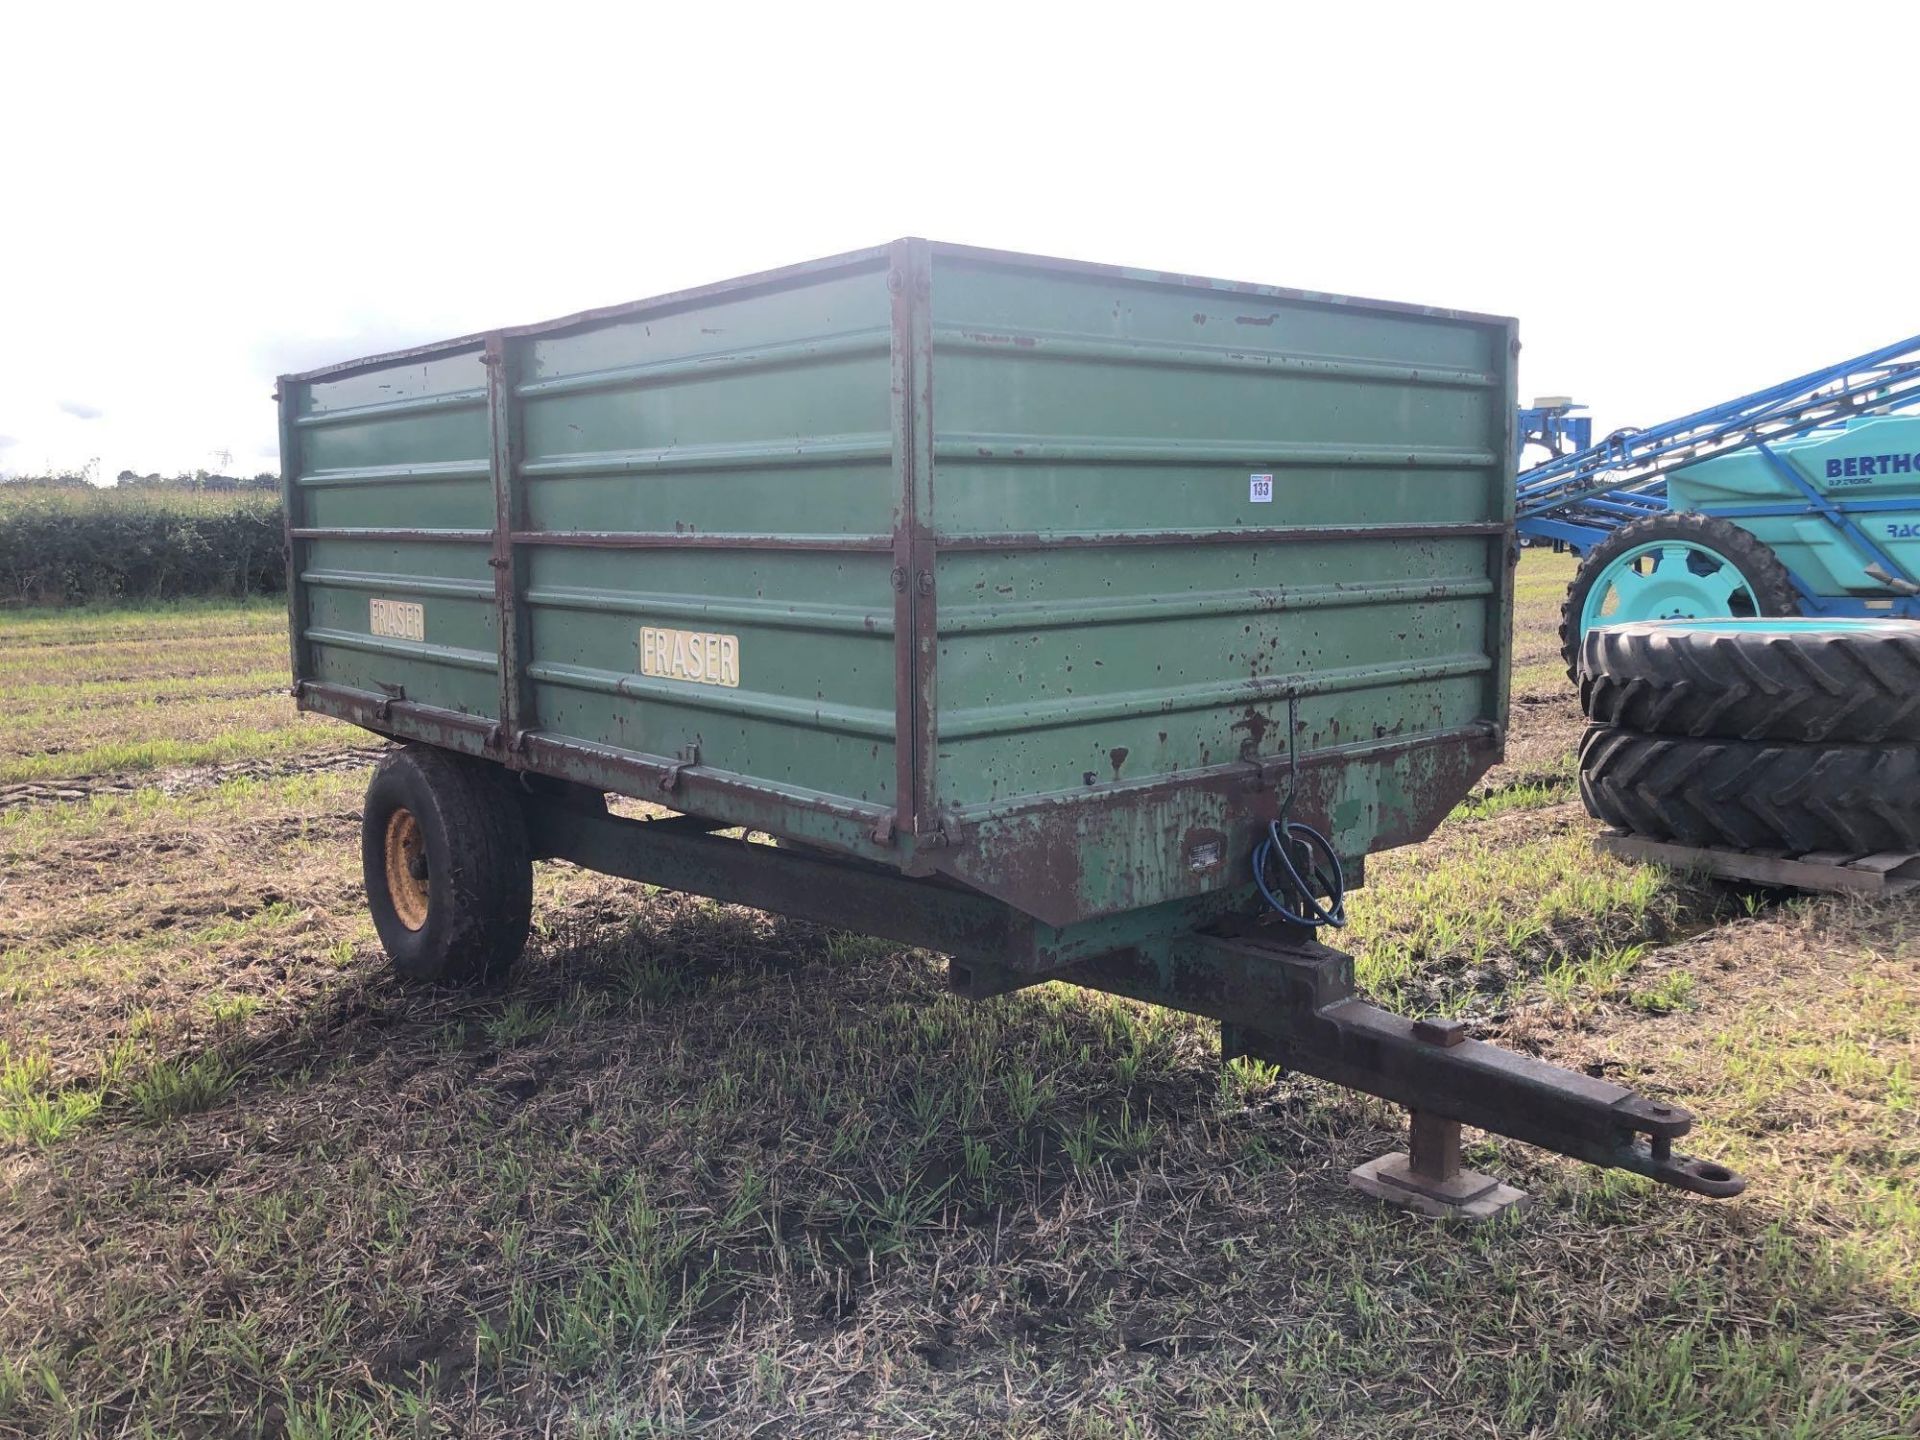 Fraser 6t drop side trailer c/w manual tailgate and grain chute single axle on 12.5/80-15.3 wheels a - Image 2 of 5